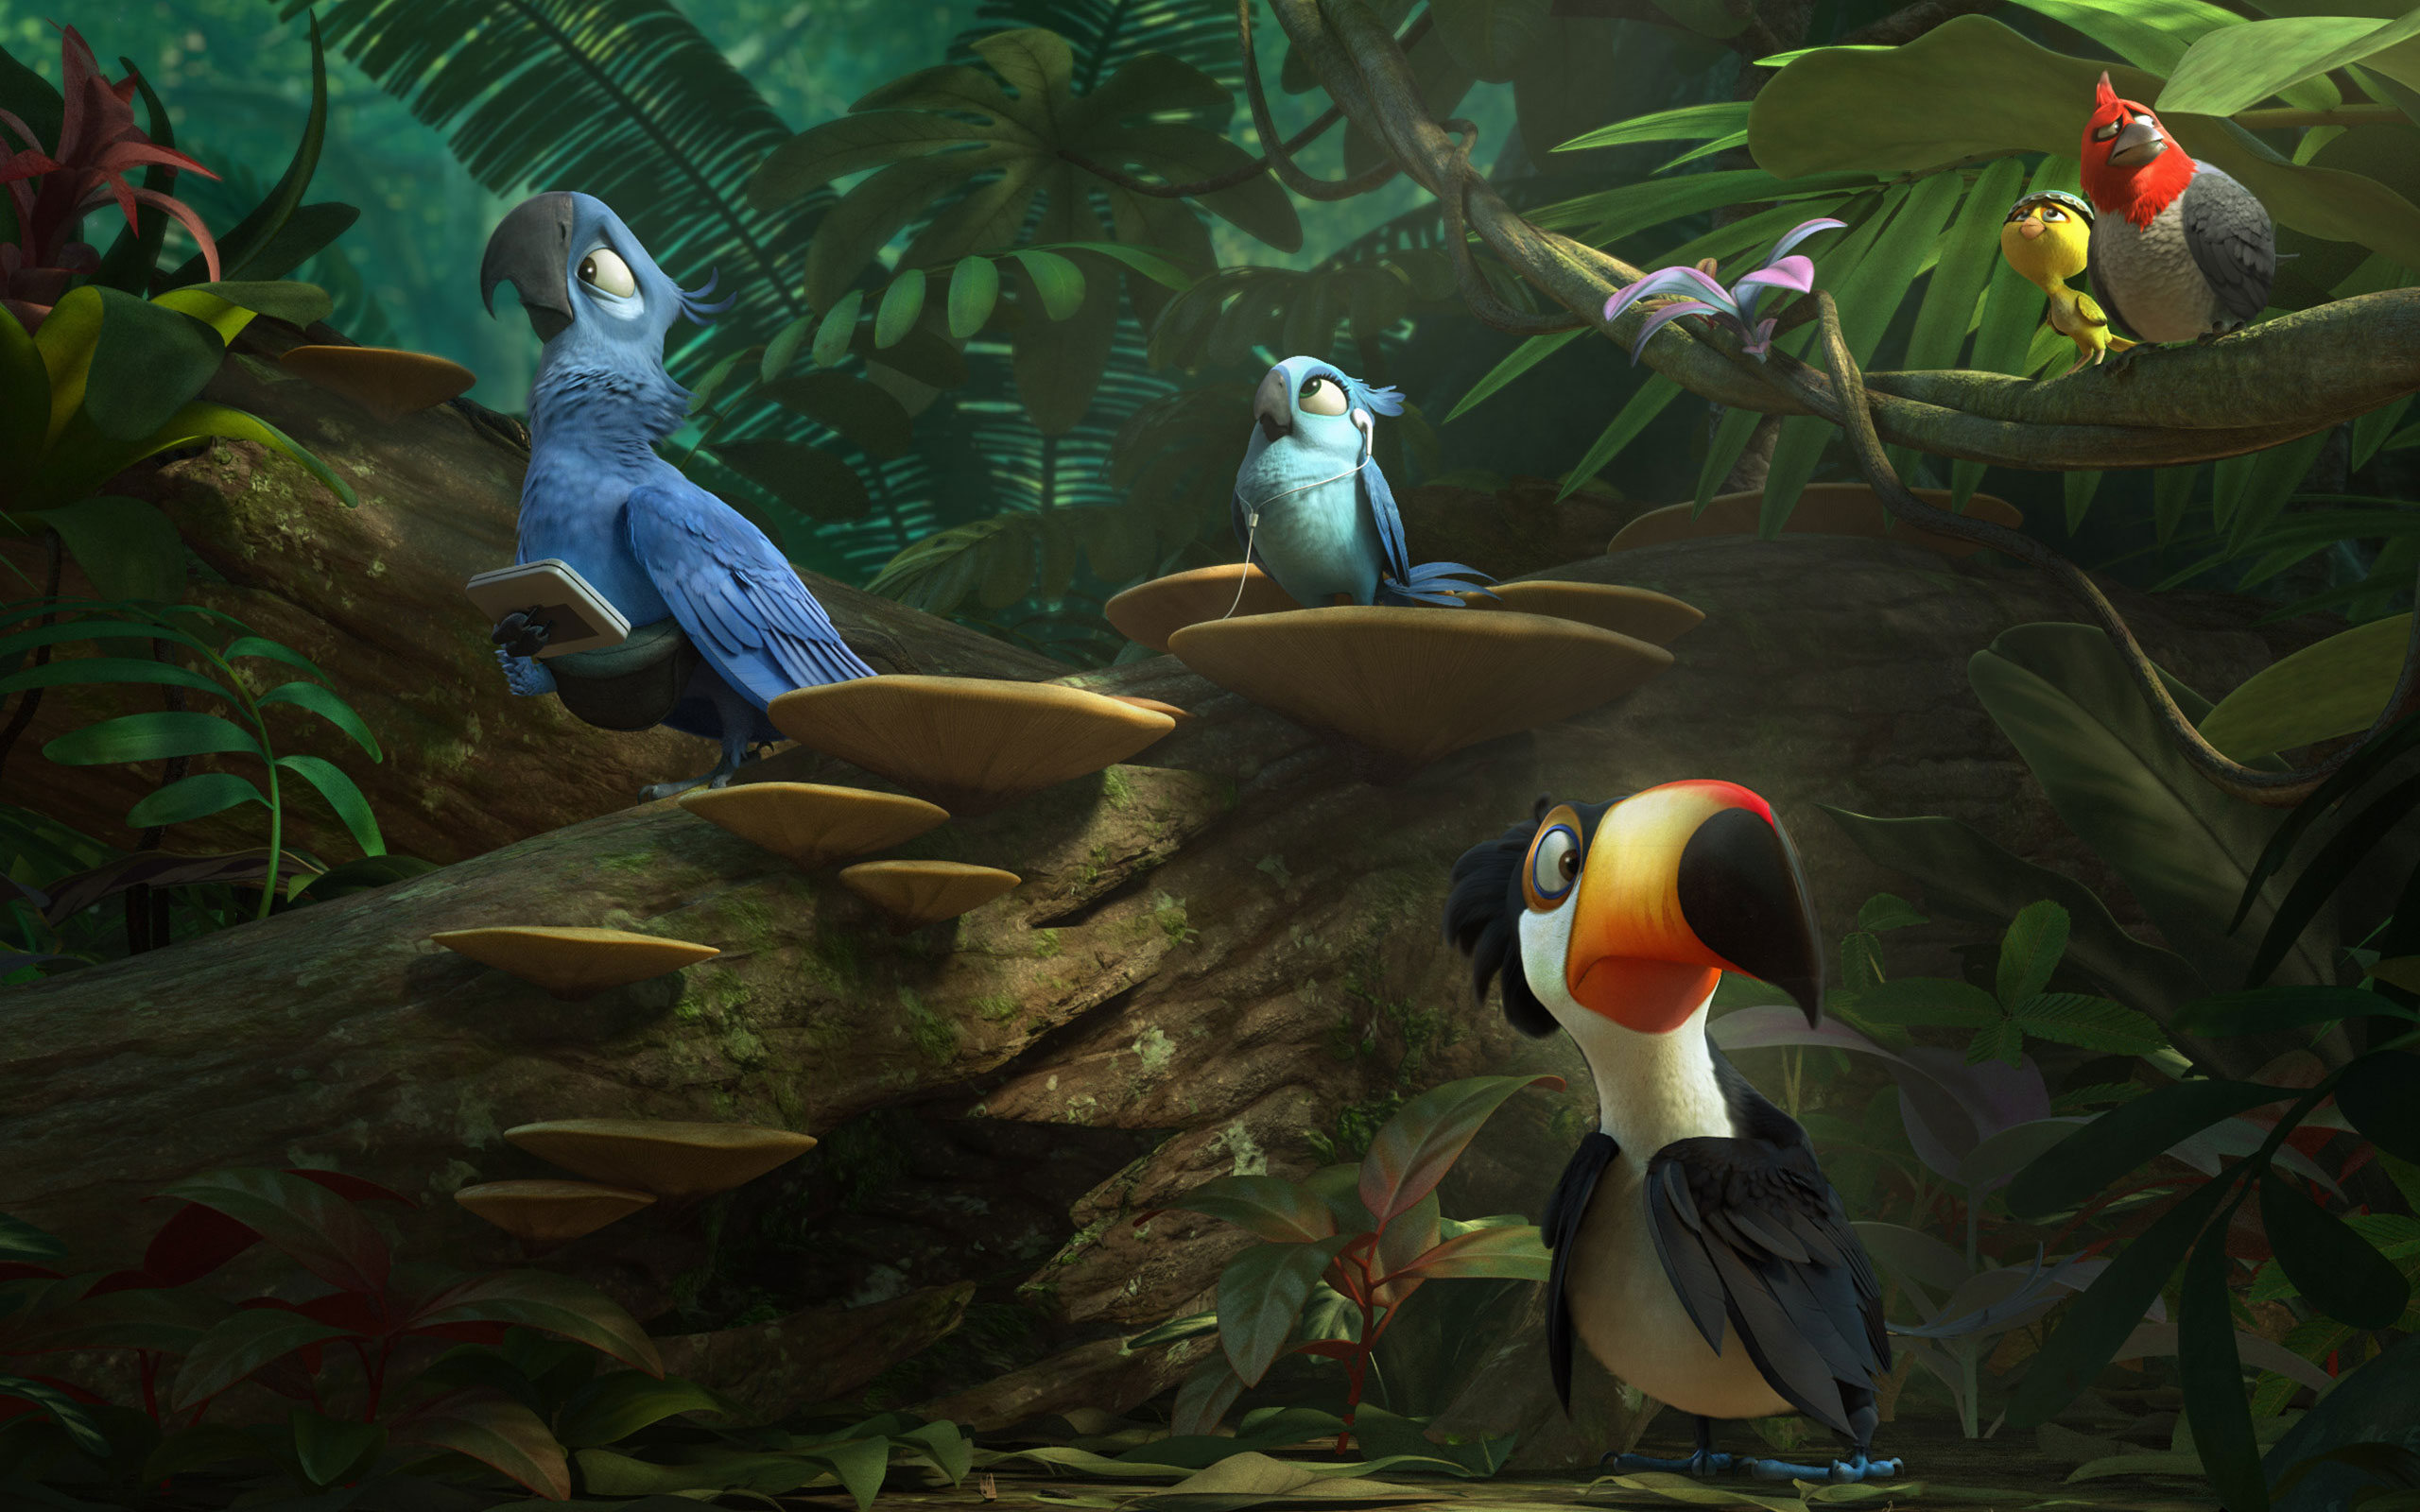 Free HD Rio 2 Movie Wallpapers & Desktop Backgrounds (2014)